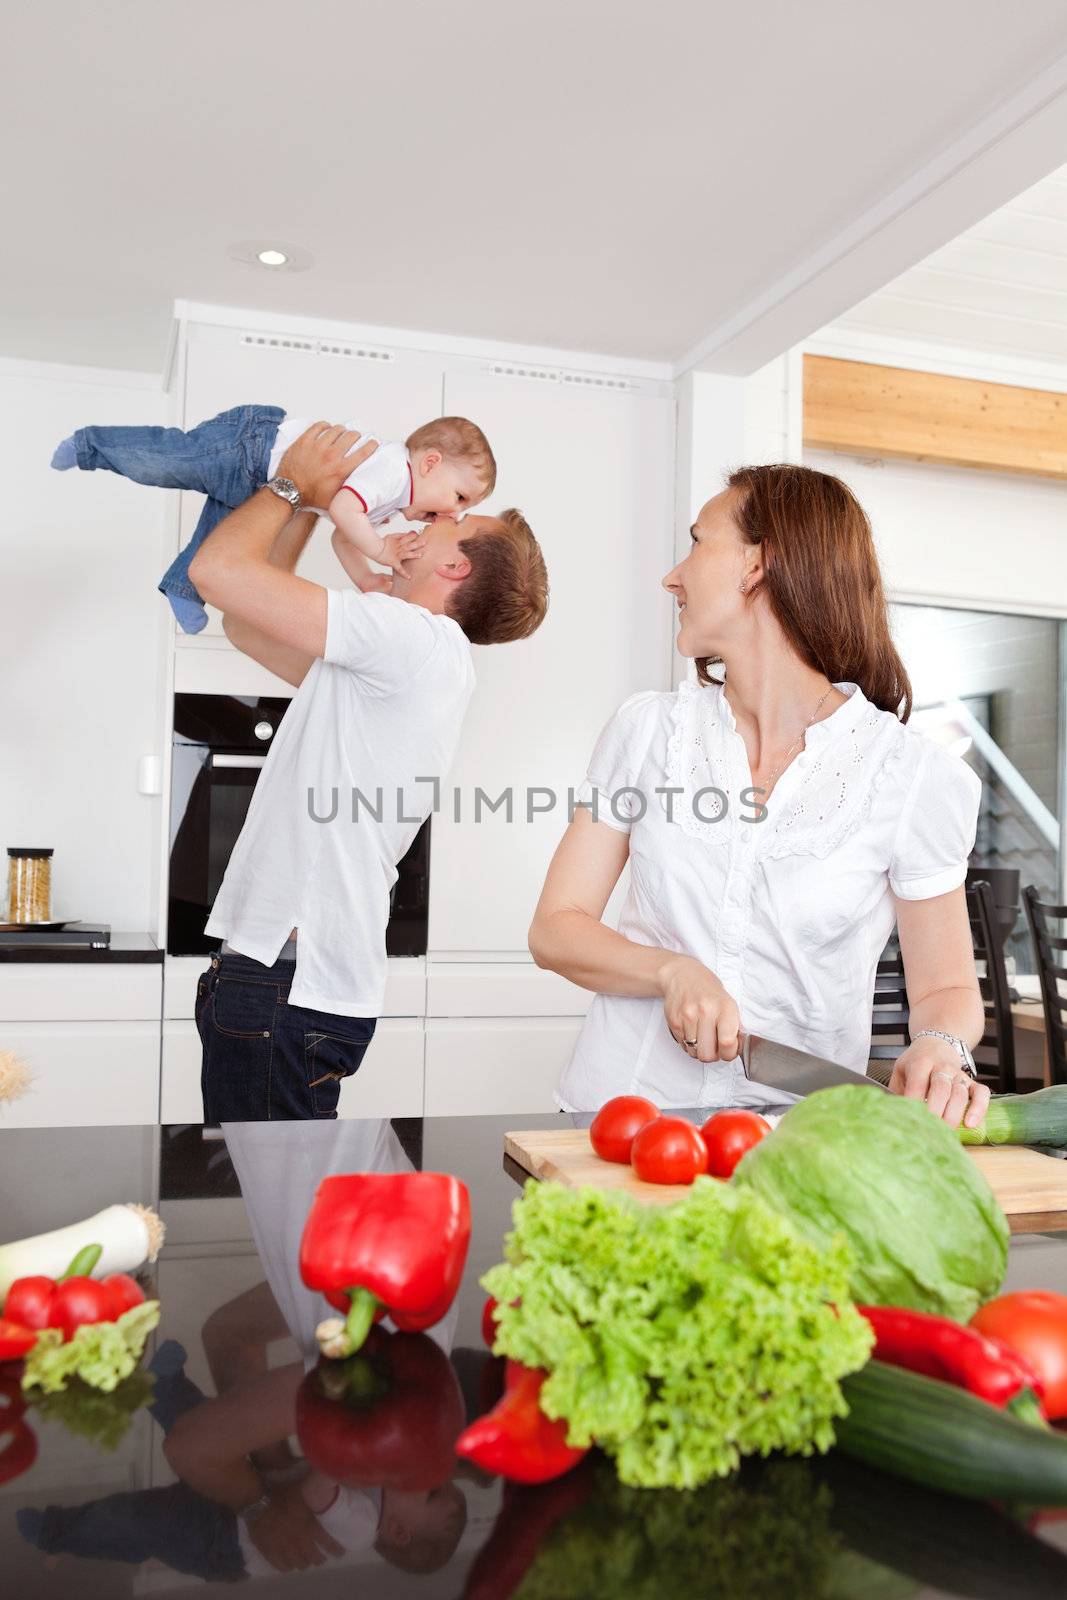 Father playing with child while mother cuts vegetables in kitchen